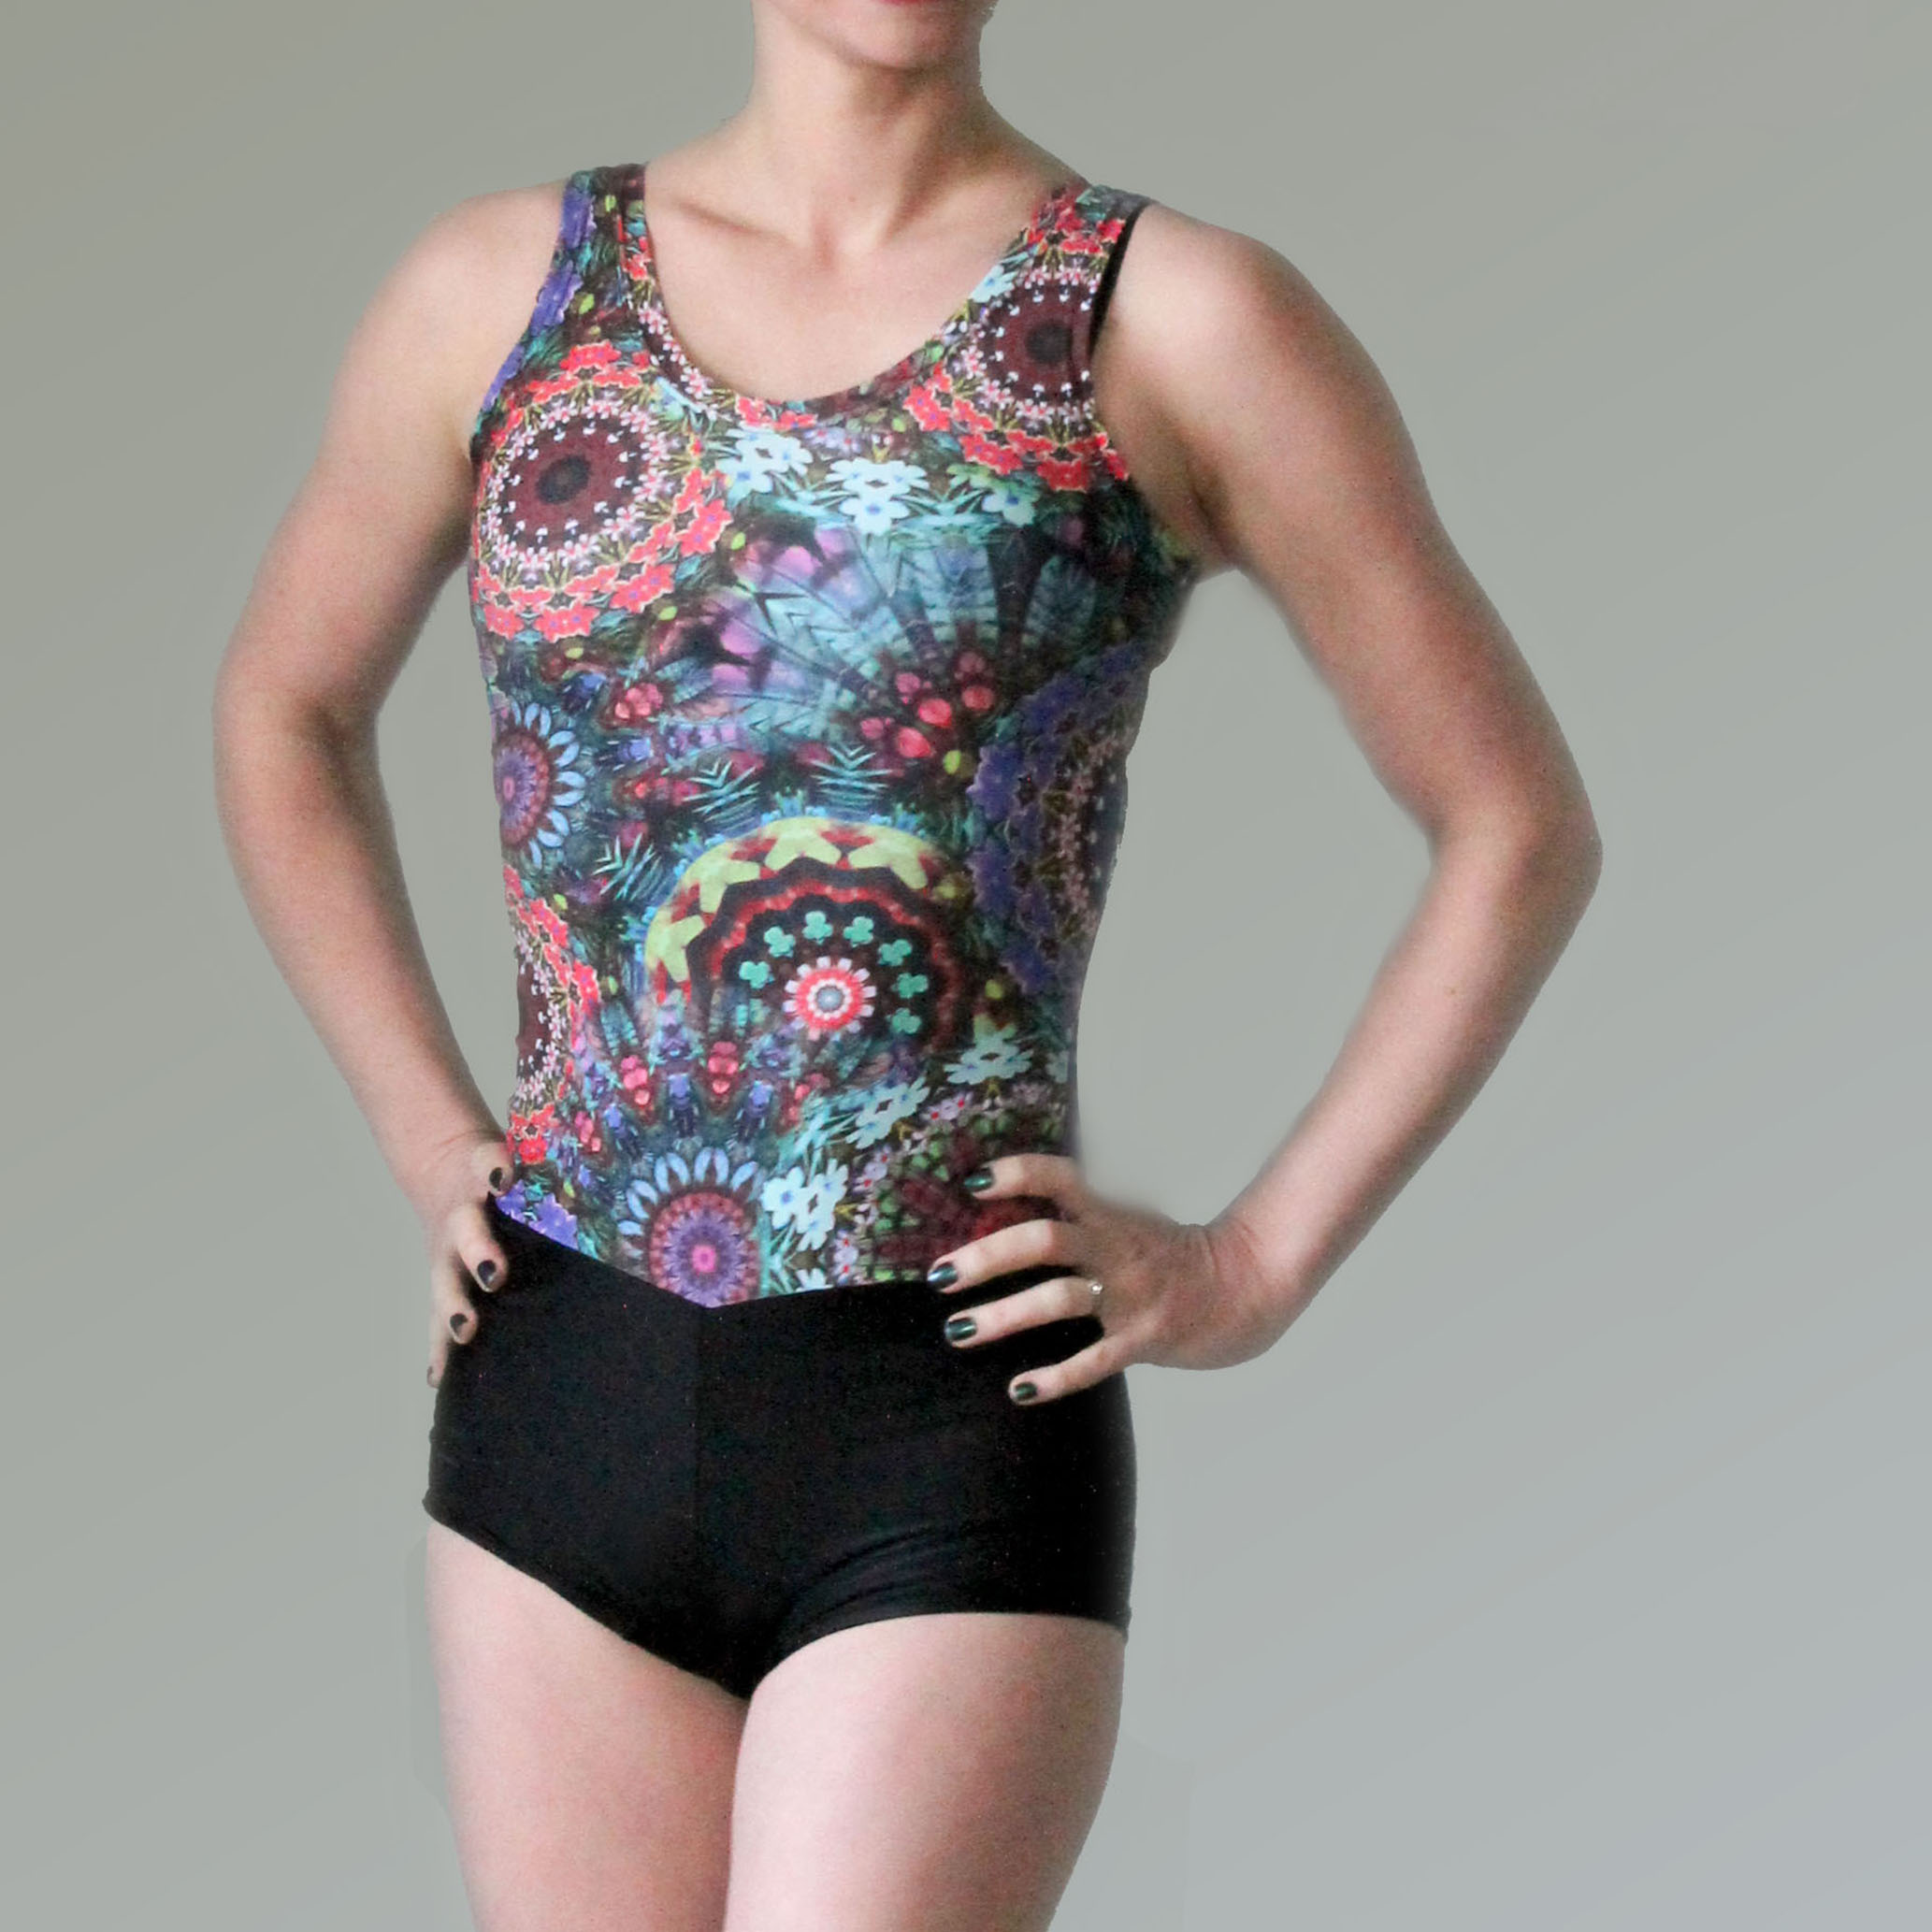 A patterned and black tank leotard on a woman's body